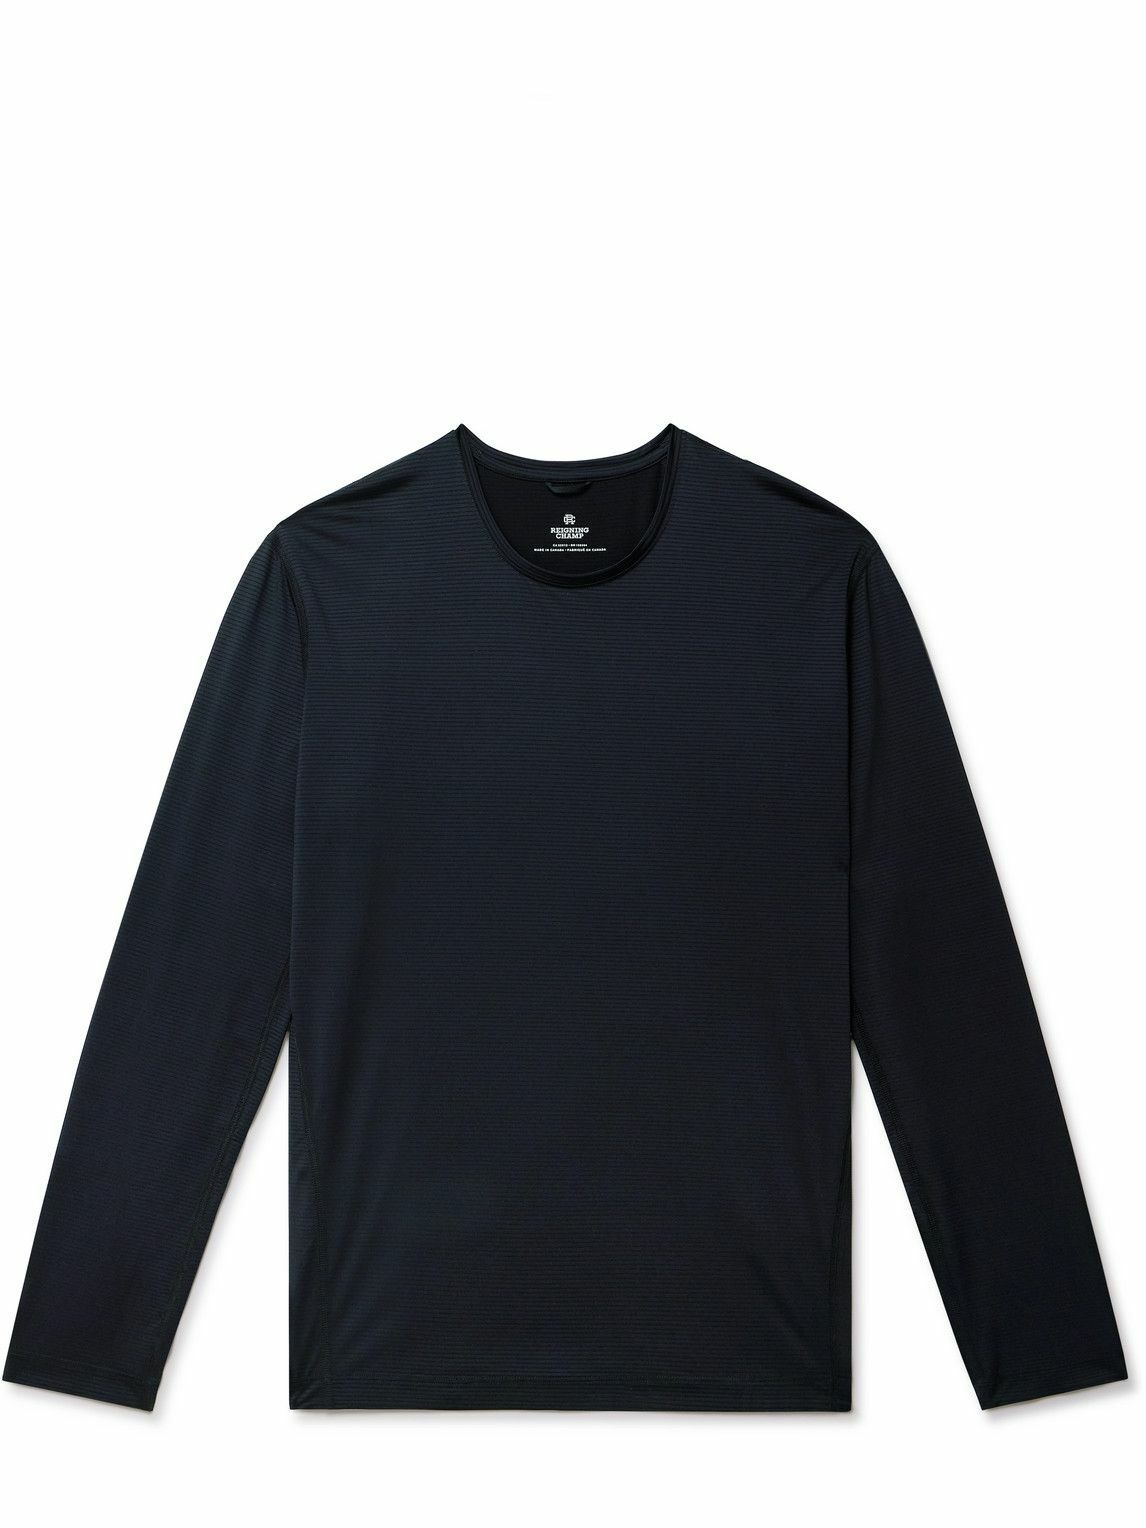 Reigning Champ - Striped Stretch-Jersey T-Shirt - Black Reigning Champ